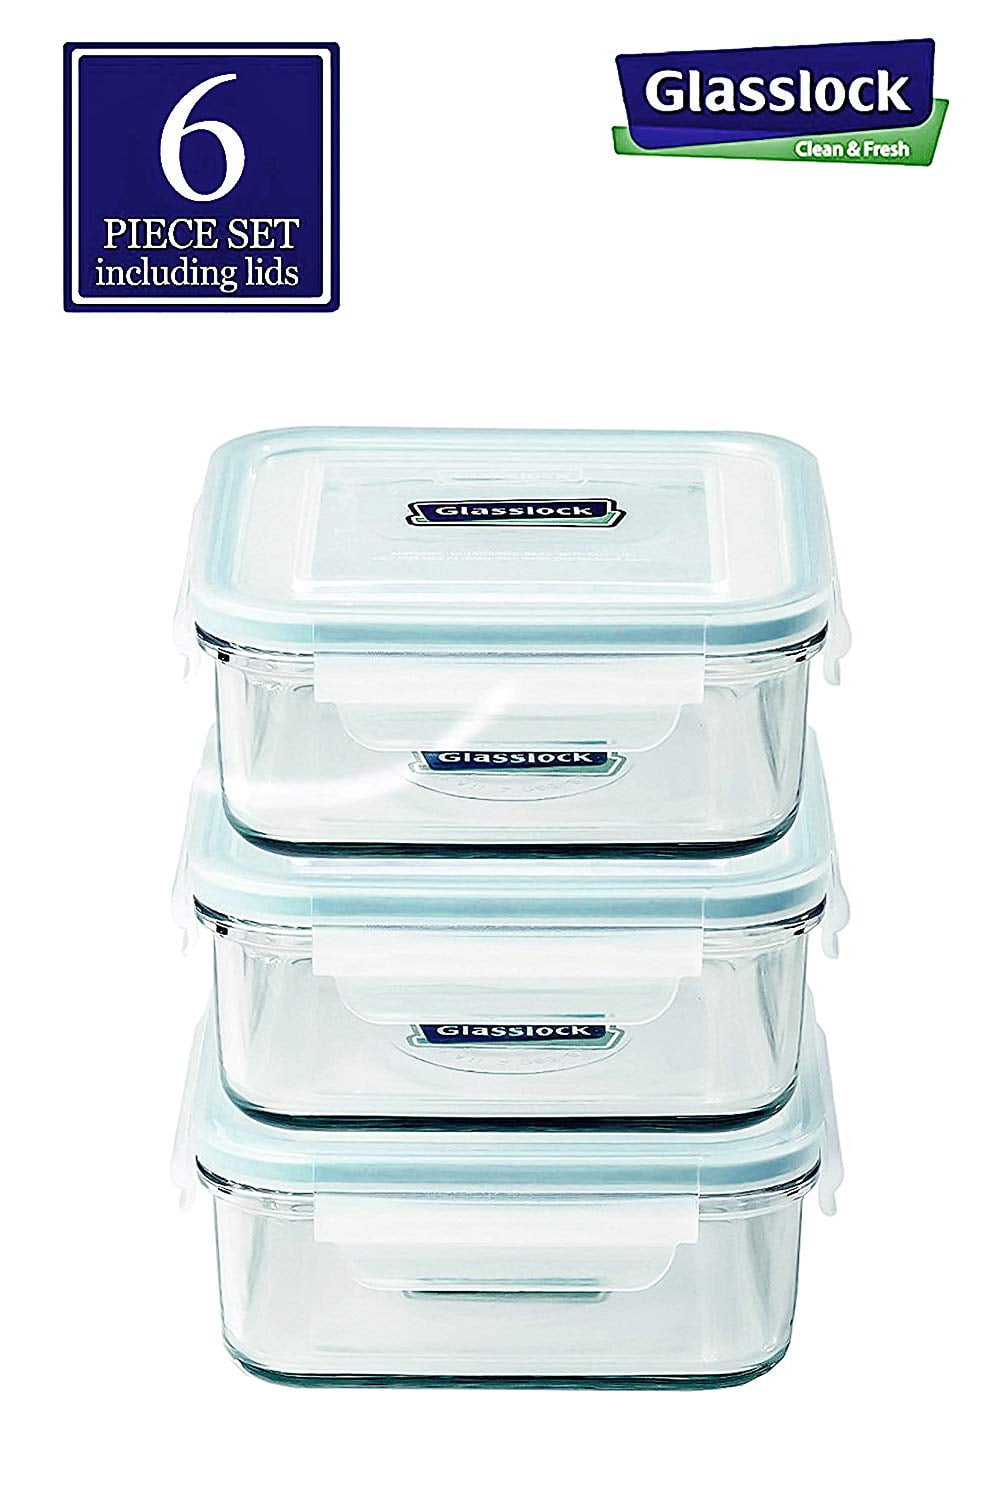 Glasslock Tempered Glass Food Storage Containers with Locking Lids, 16  Piece Set, 1 Piece - Jay C Food Stores